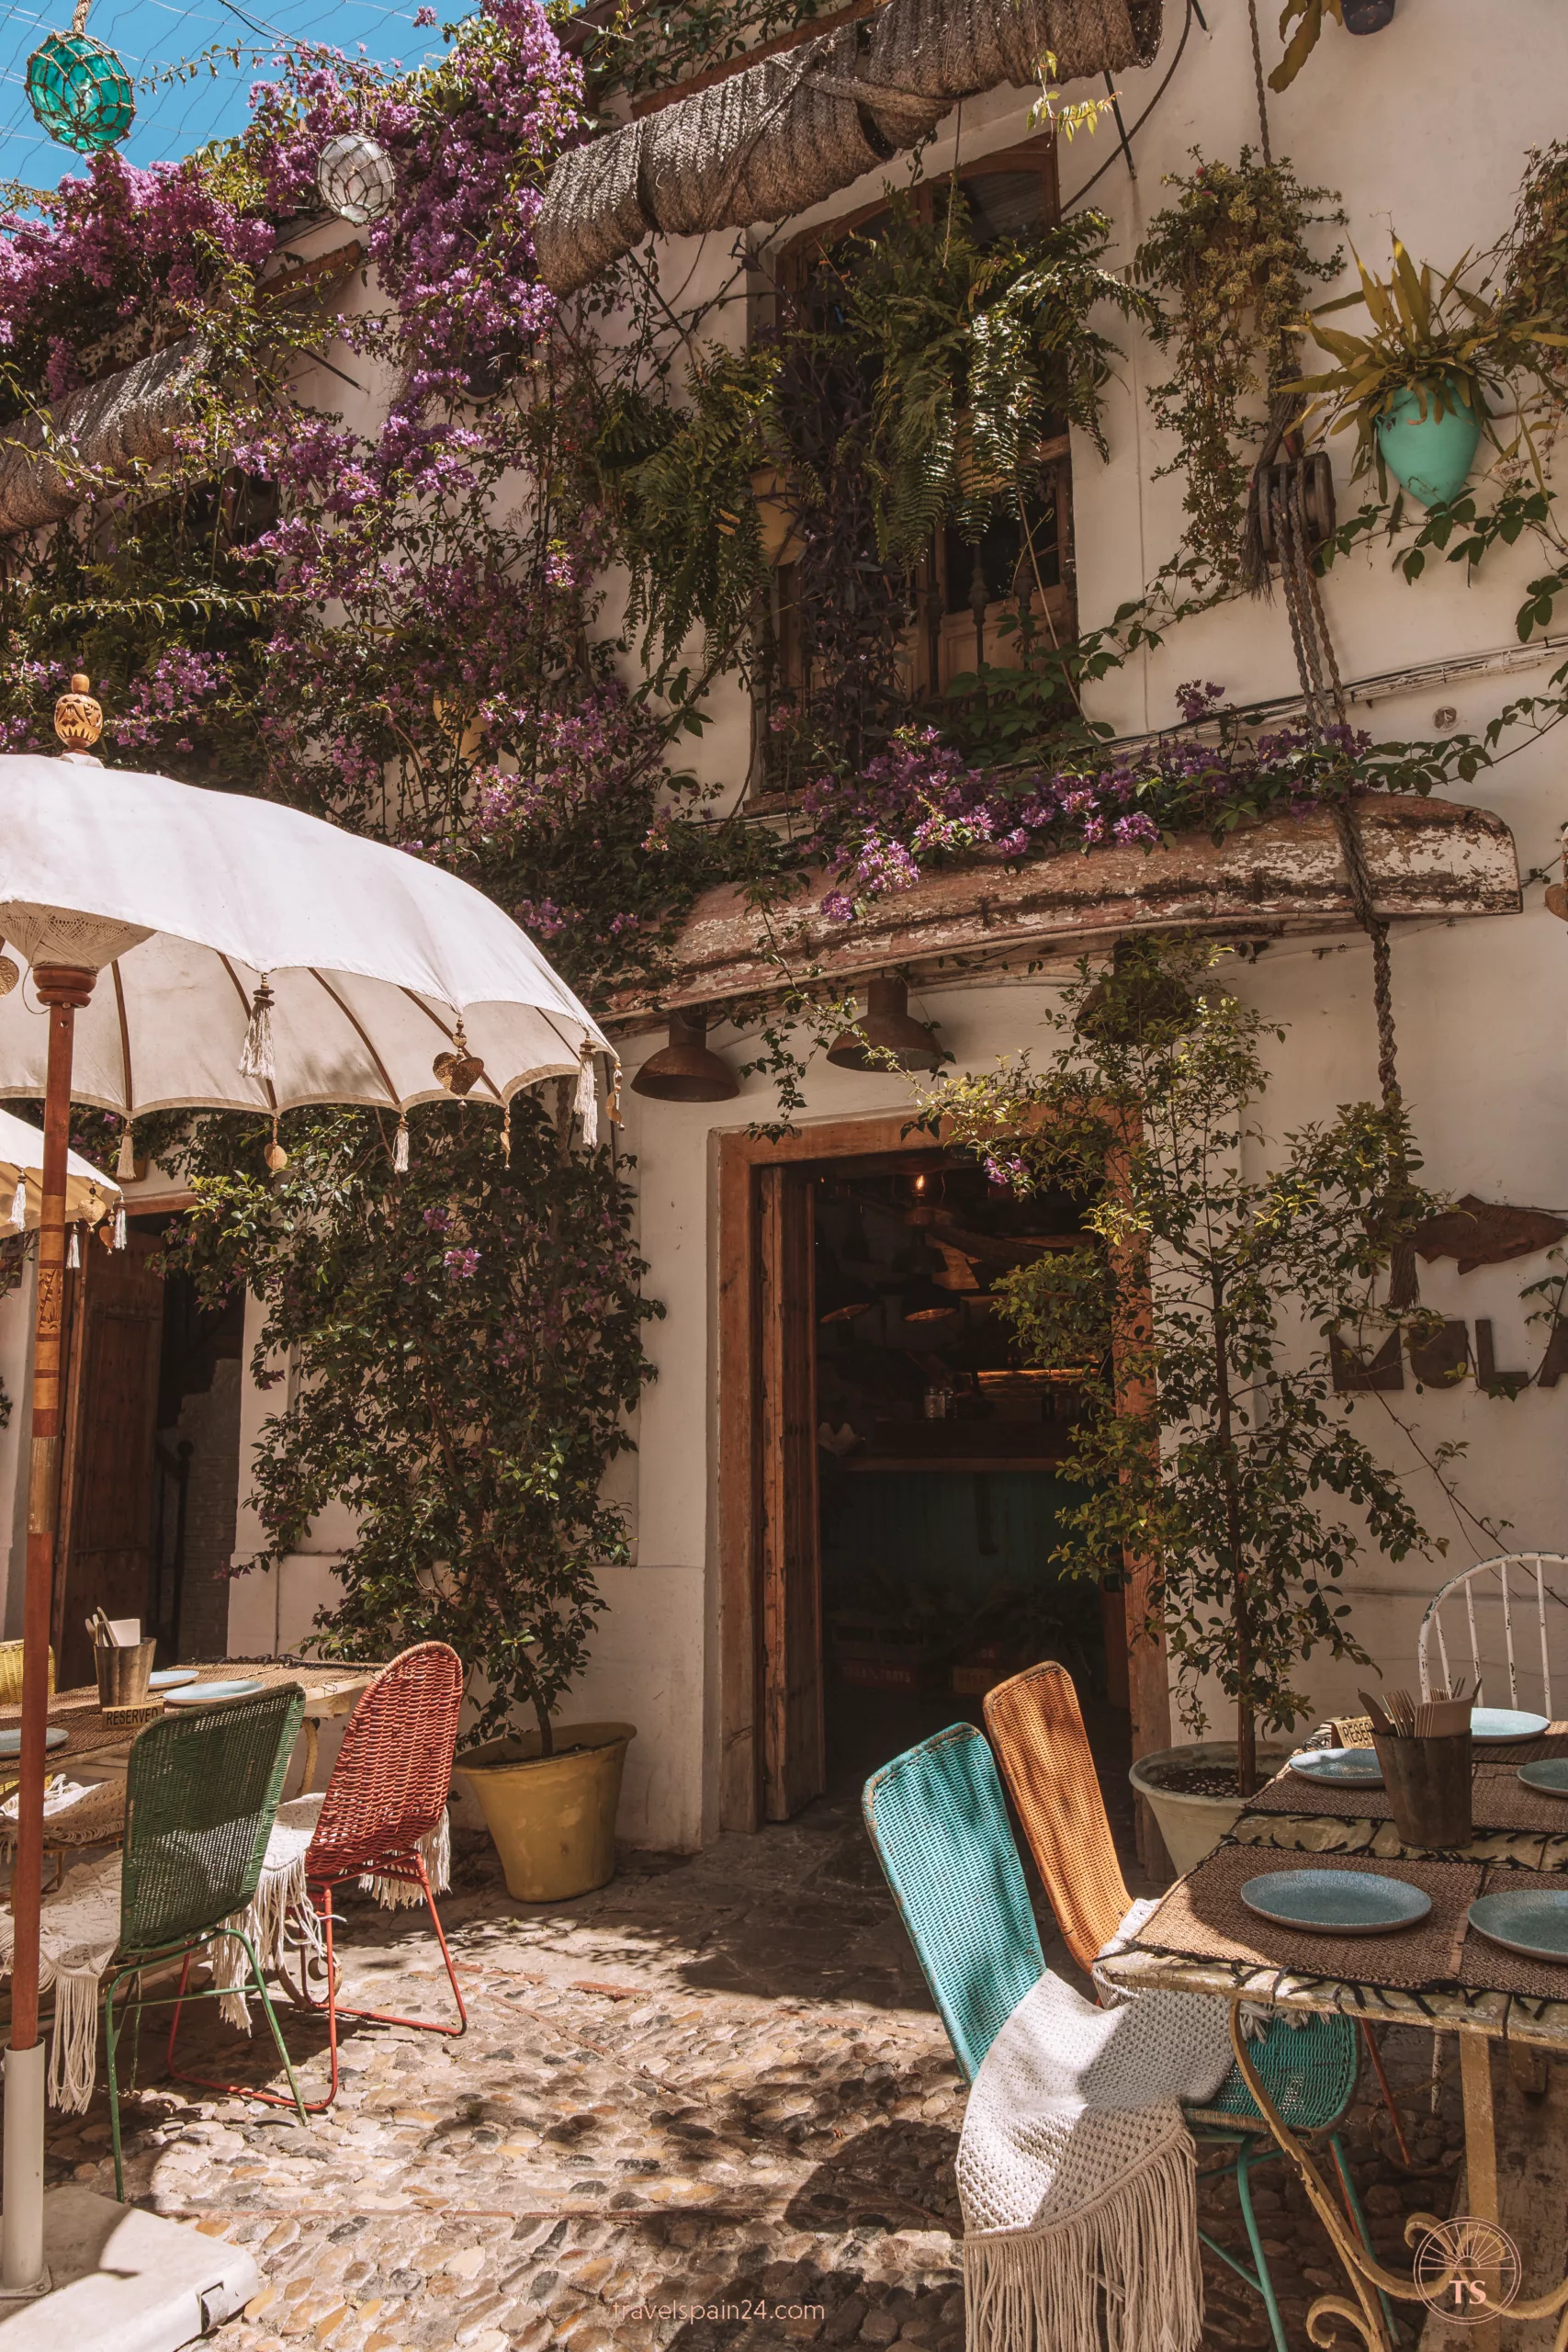 Terrace of a restaurant on Calle Pescadería Vieja in Jerez de la Frontera, with colorful chairs and climbing plants covering the facade. This image captures the vibrant dining scene in the city